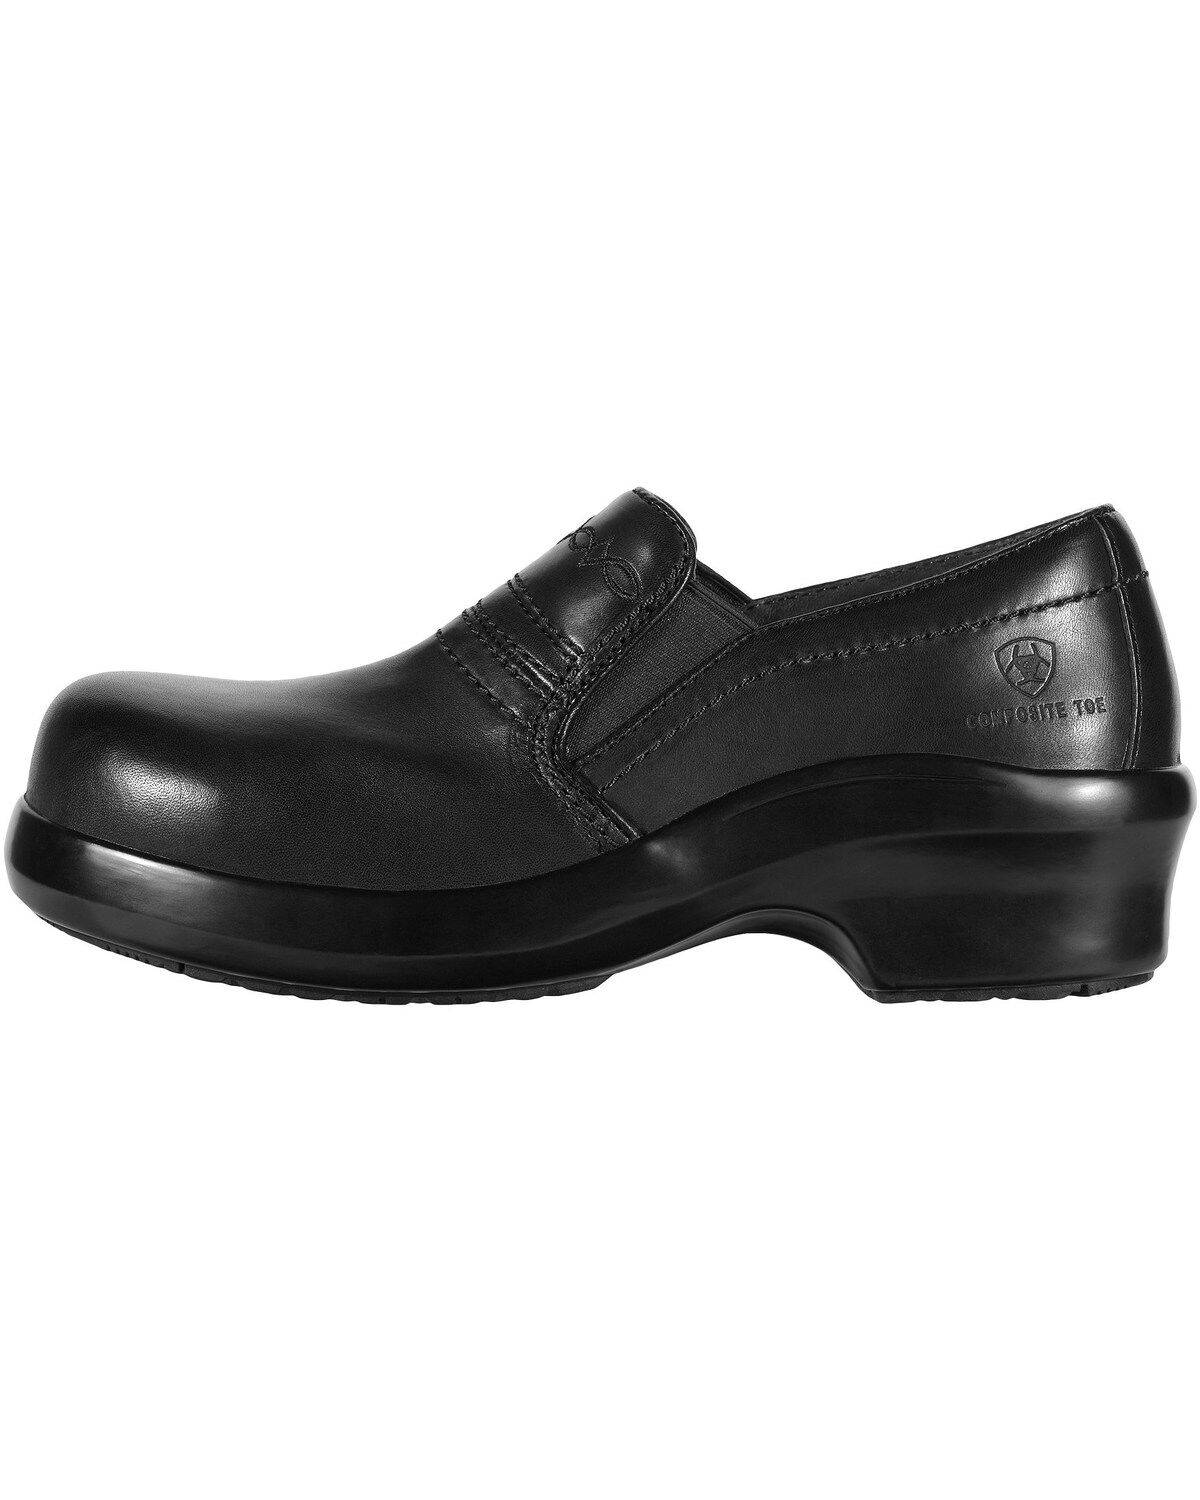 safety toe clogs